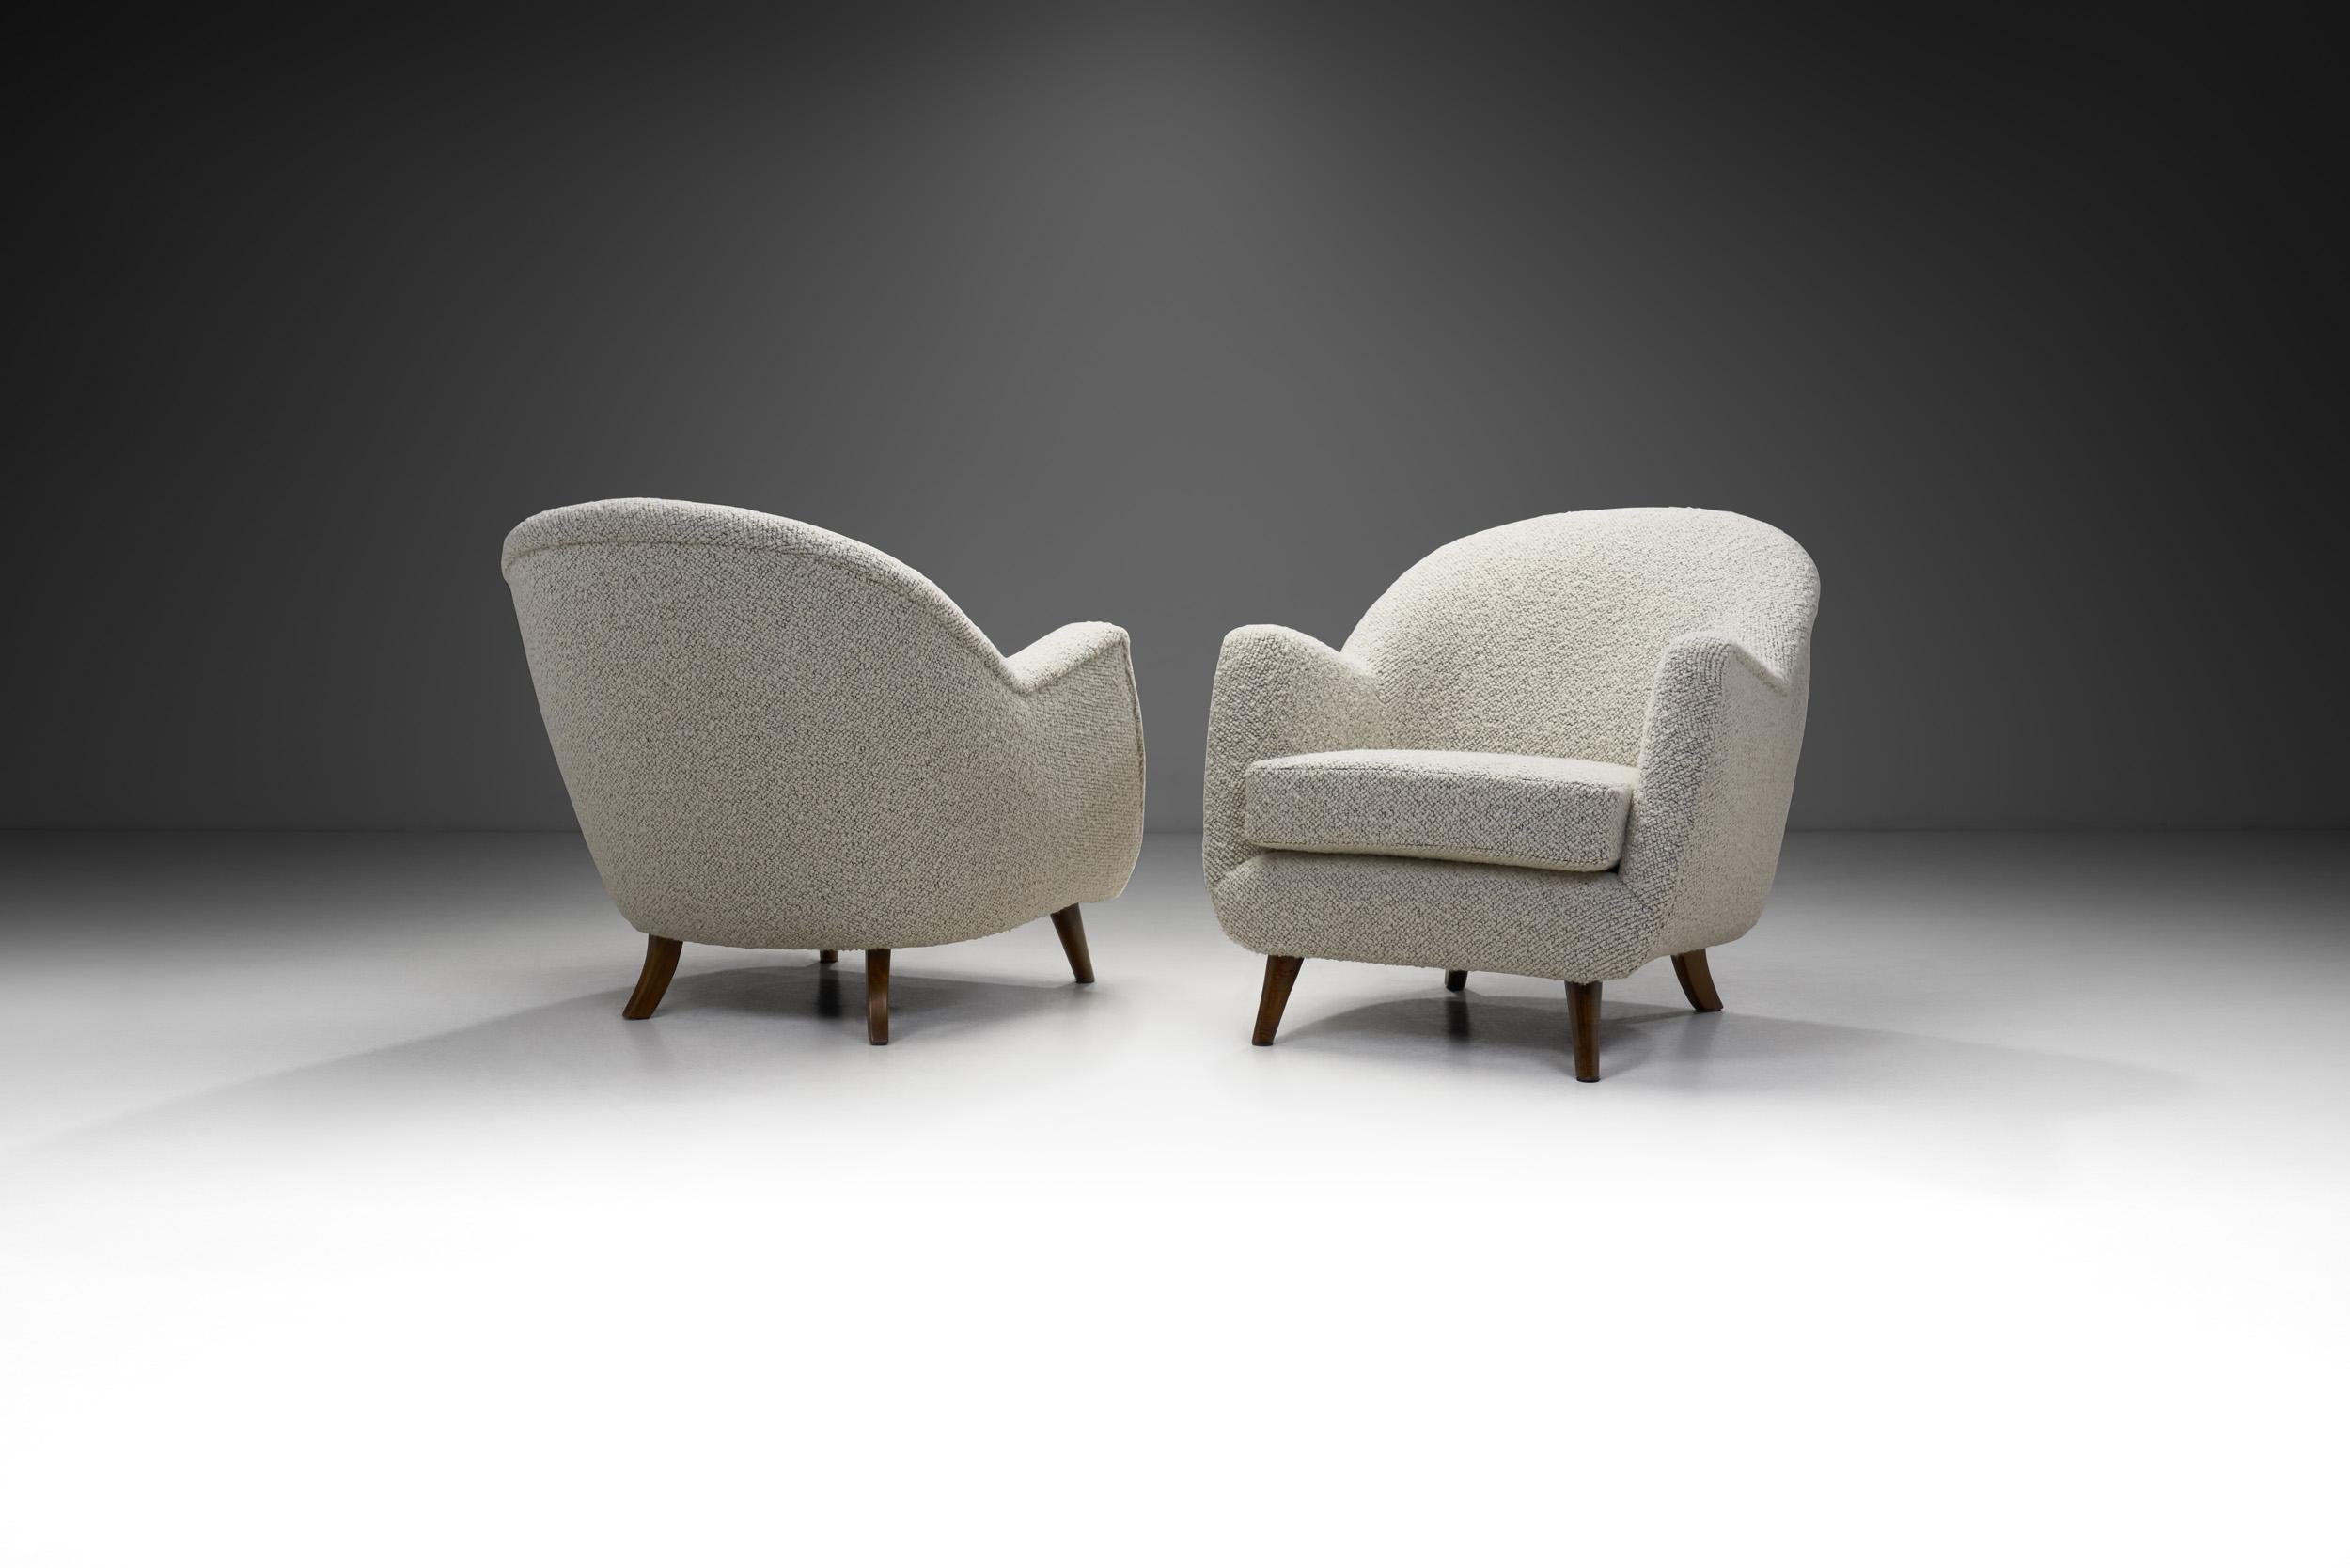 In the midst of the swinging 1960s a remarkable design style emerged, a kind of mature mid-century modernism that captivated the essence of the era's design trends. These lounge chairs, mixing classic materials and shapes, remain exemplary